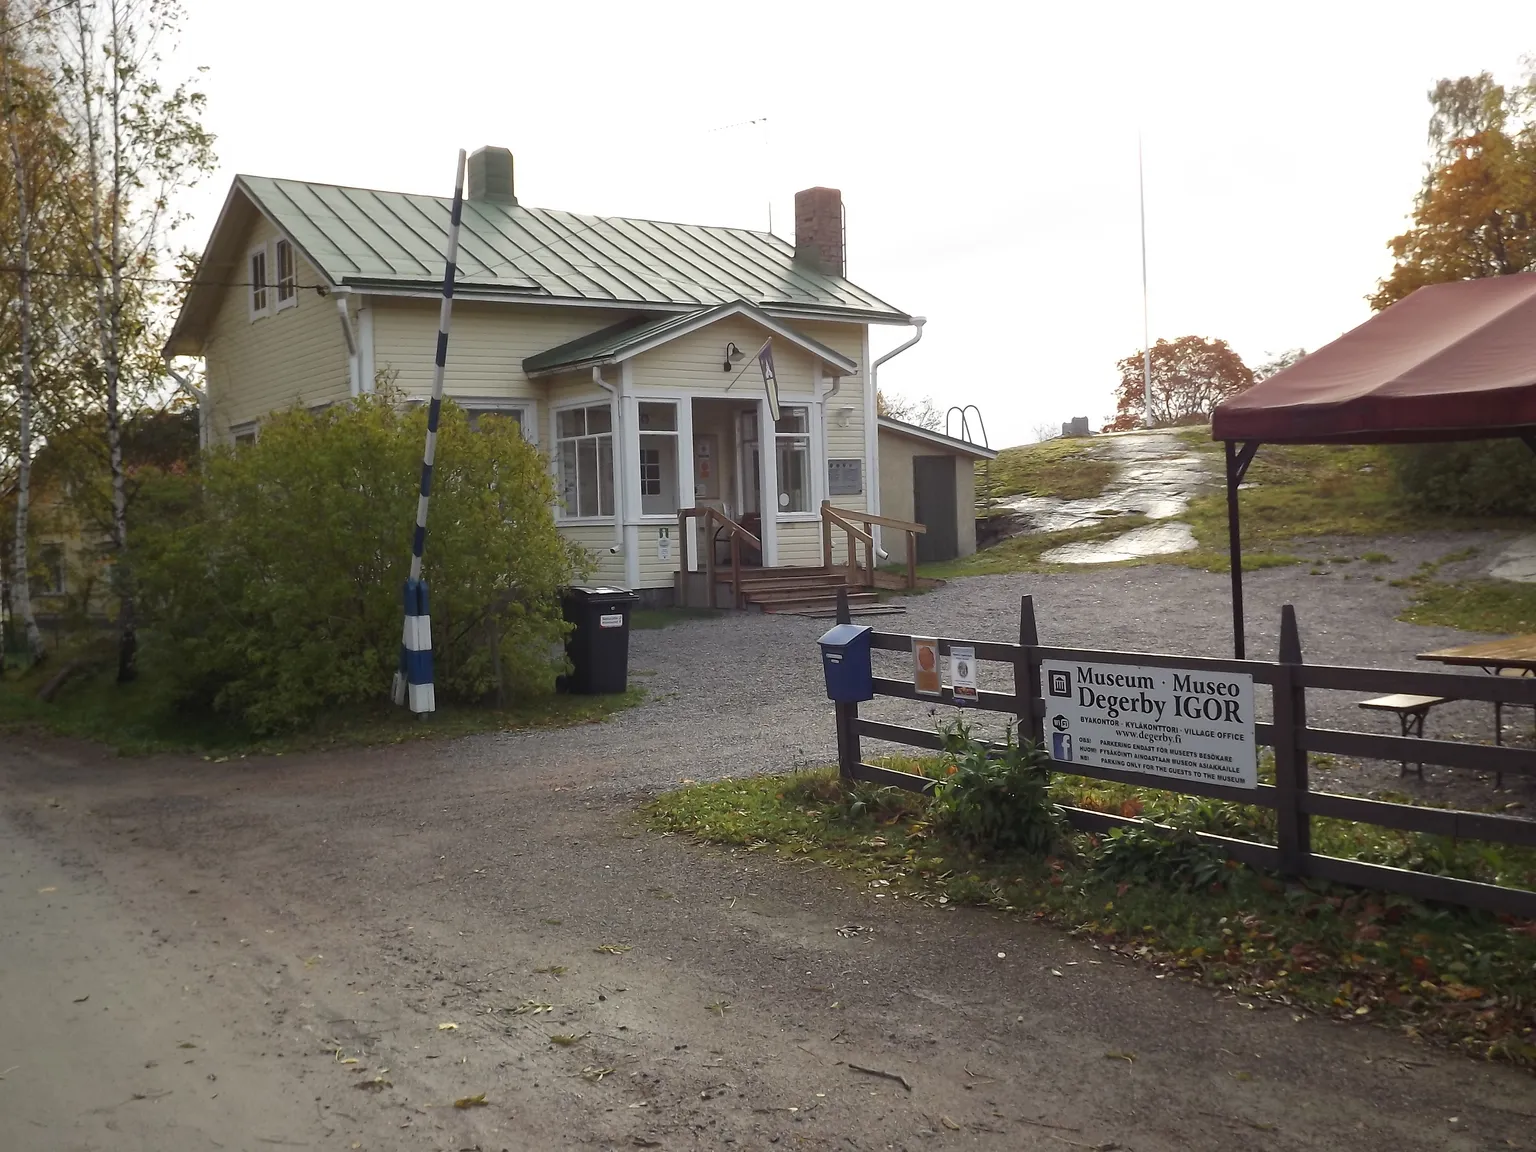 Photo showing: The Degerby Igor museum: the former municipal office building. The former fire station also part of the museum outside the image to the right.